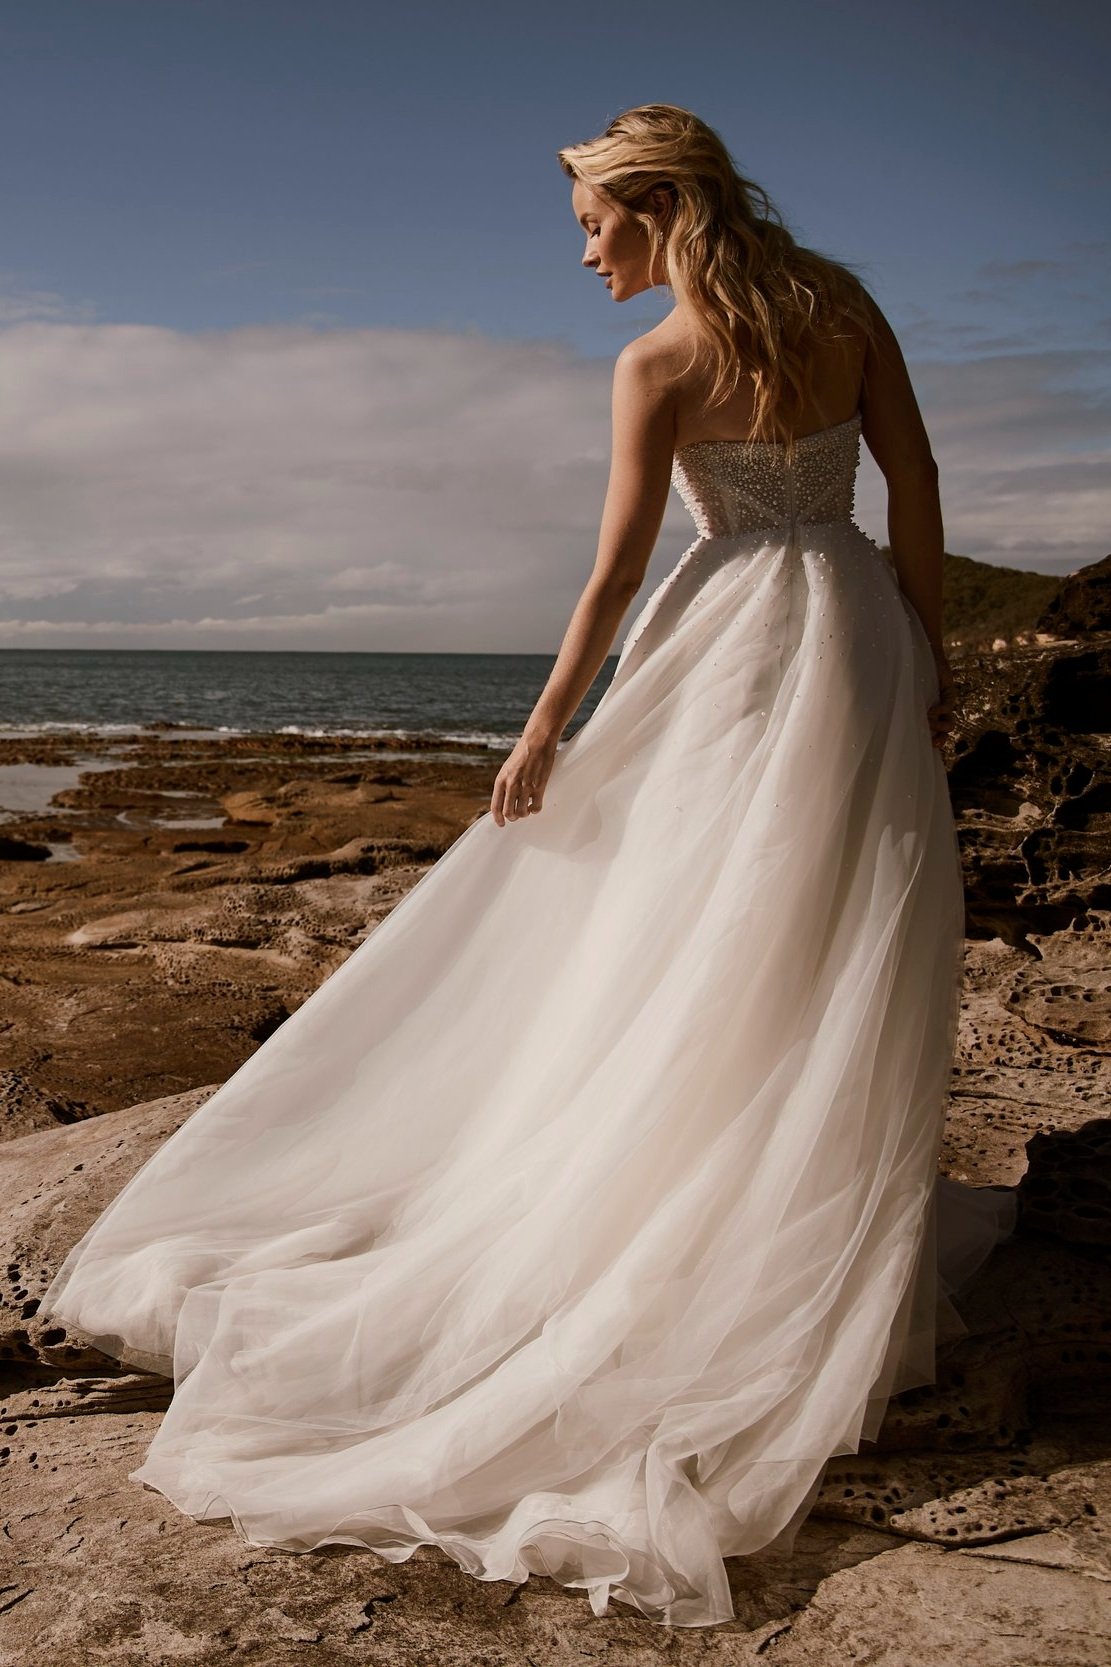 The+Tide+A+line+Bridal+Dress+with+Pearled+Bodice+and+Tulle+Skirt.jpg